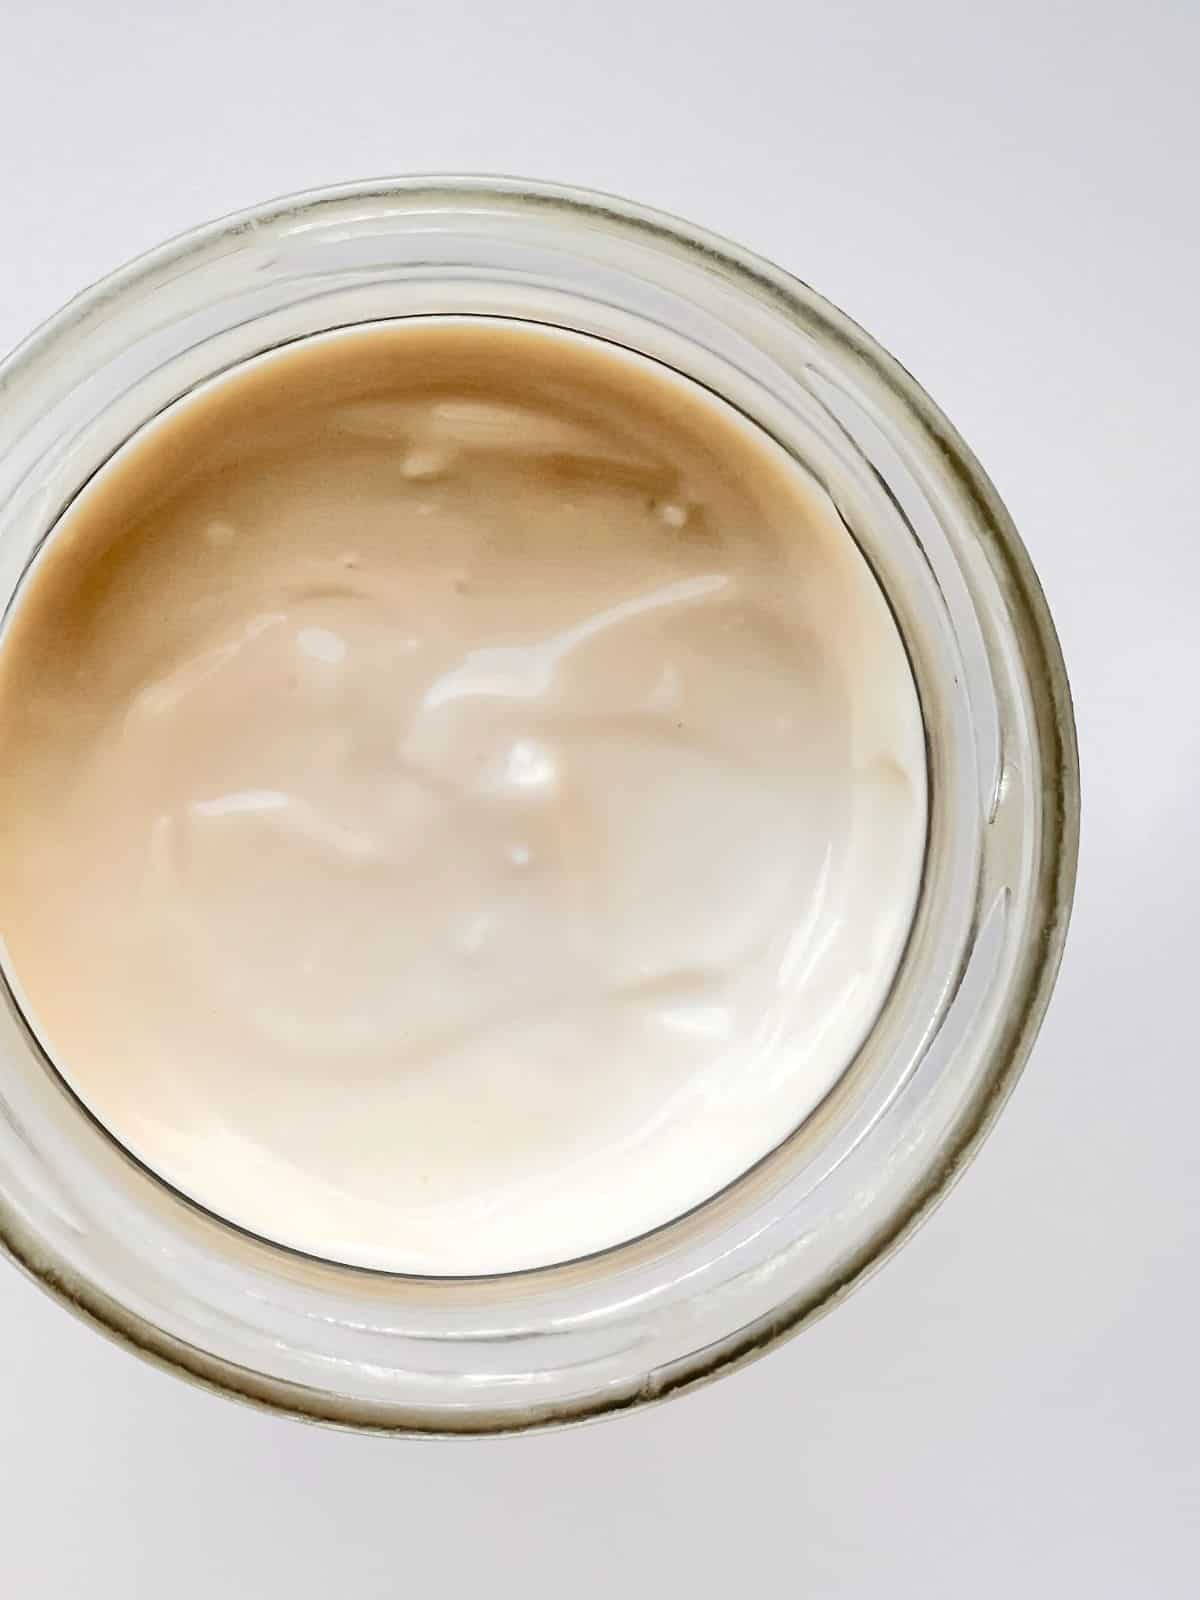 A close up image of a jar of baked milk yogurt against a white countertop.